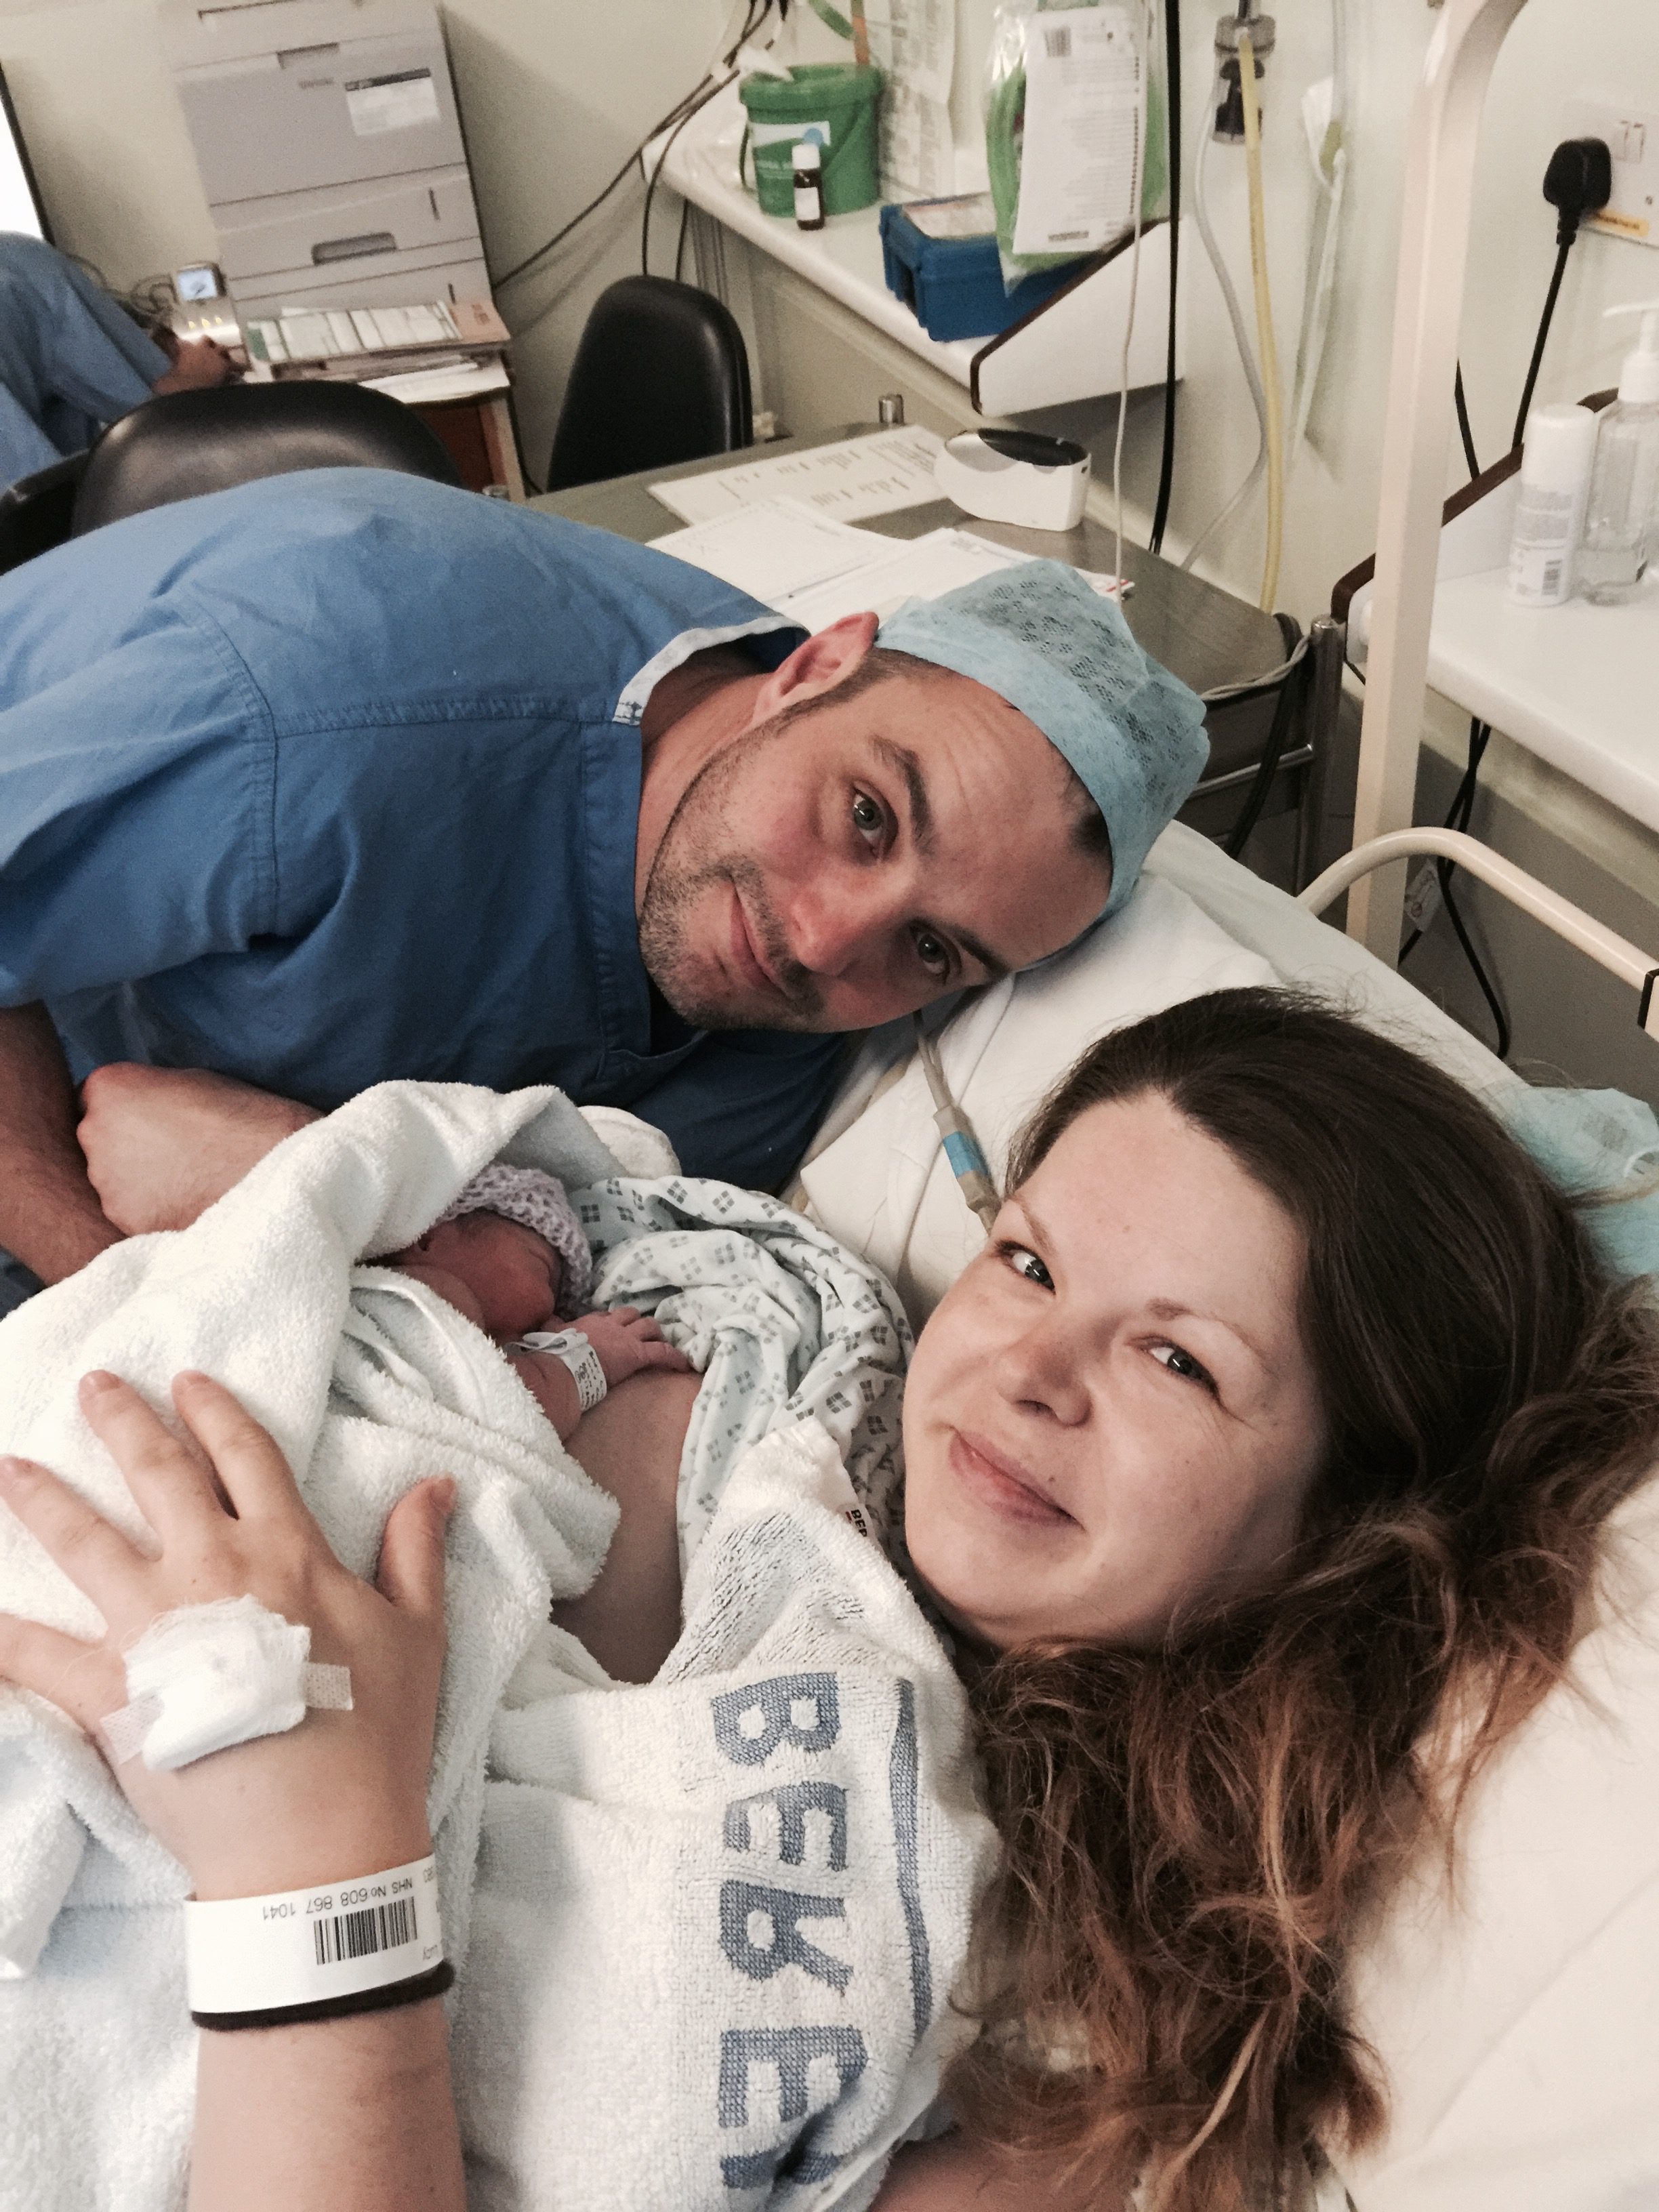 Couple welcoming baby after caesarean / c-section birth